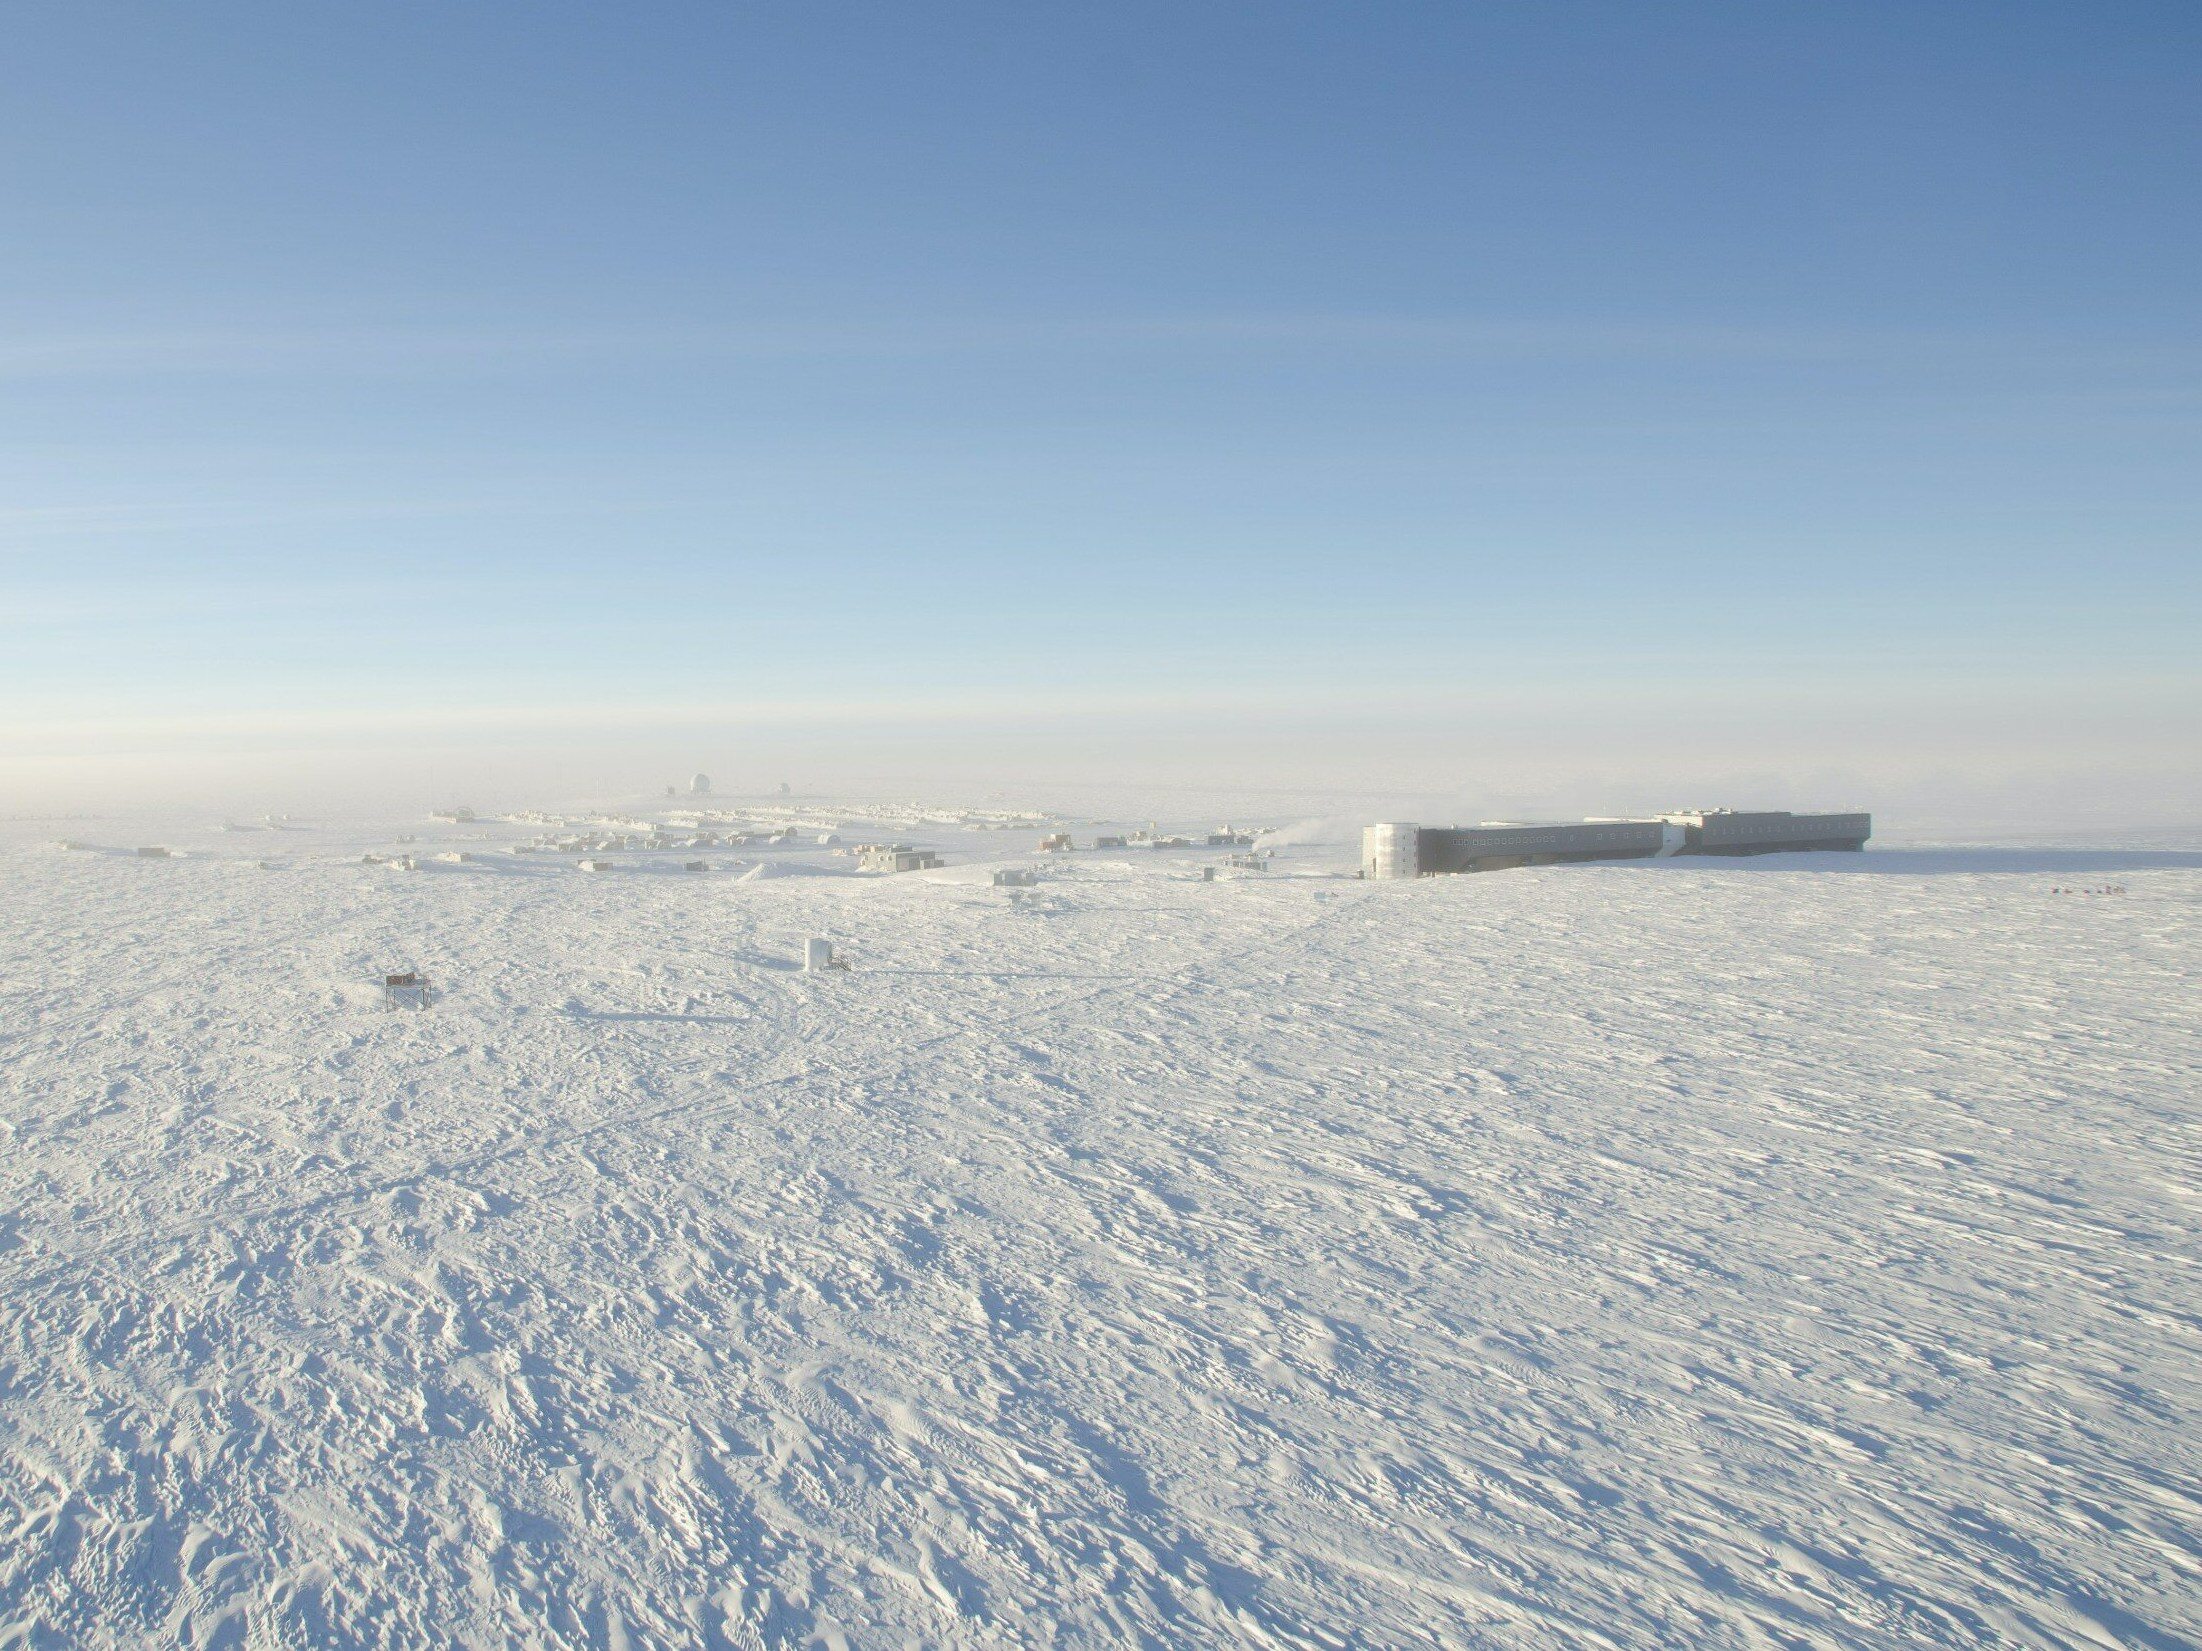 This place has been frozen for 34 million years.  Soon the ice may melt and reveal a mysterious area